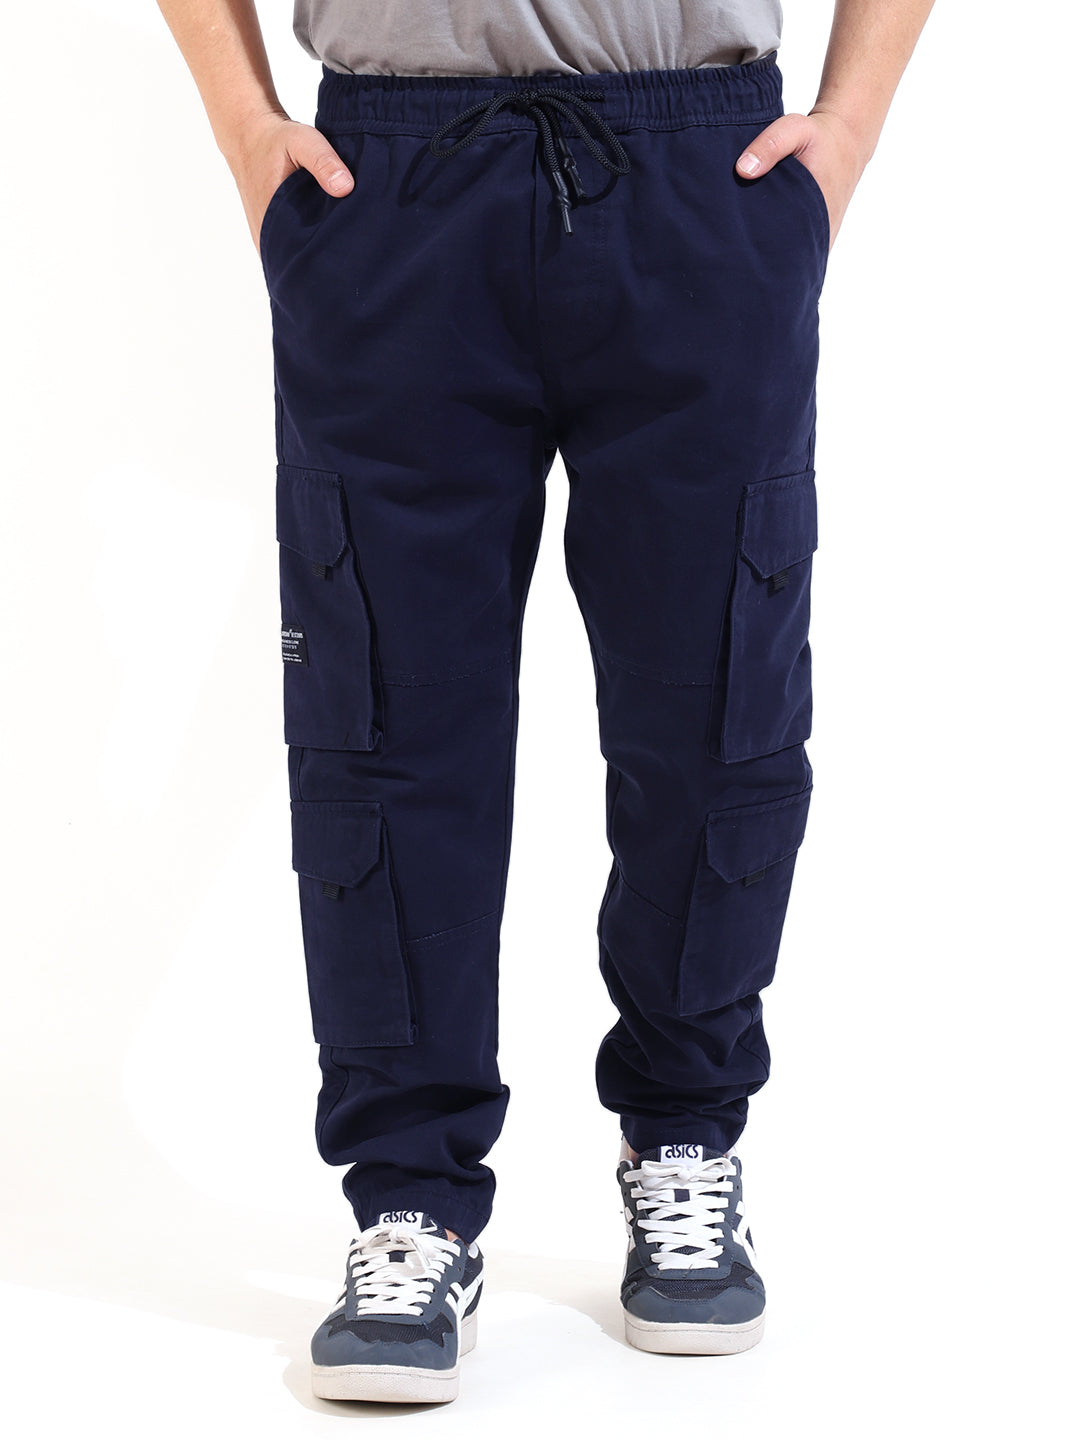 Navy 8 Pocket Cotton Twill Baggy Fit Cargo